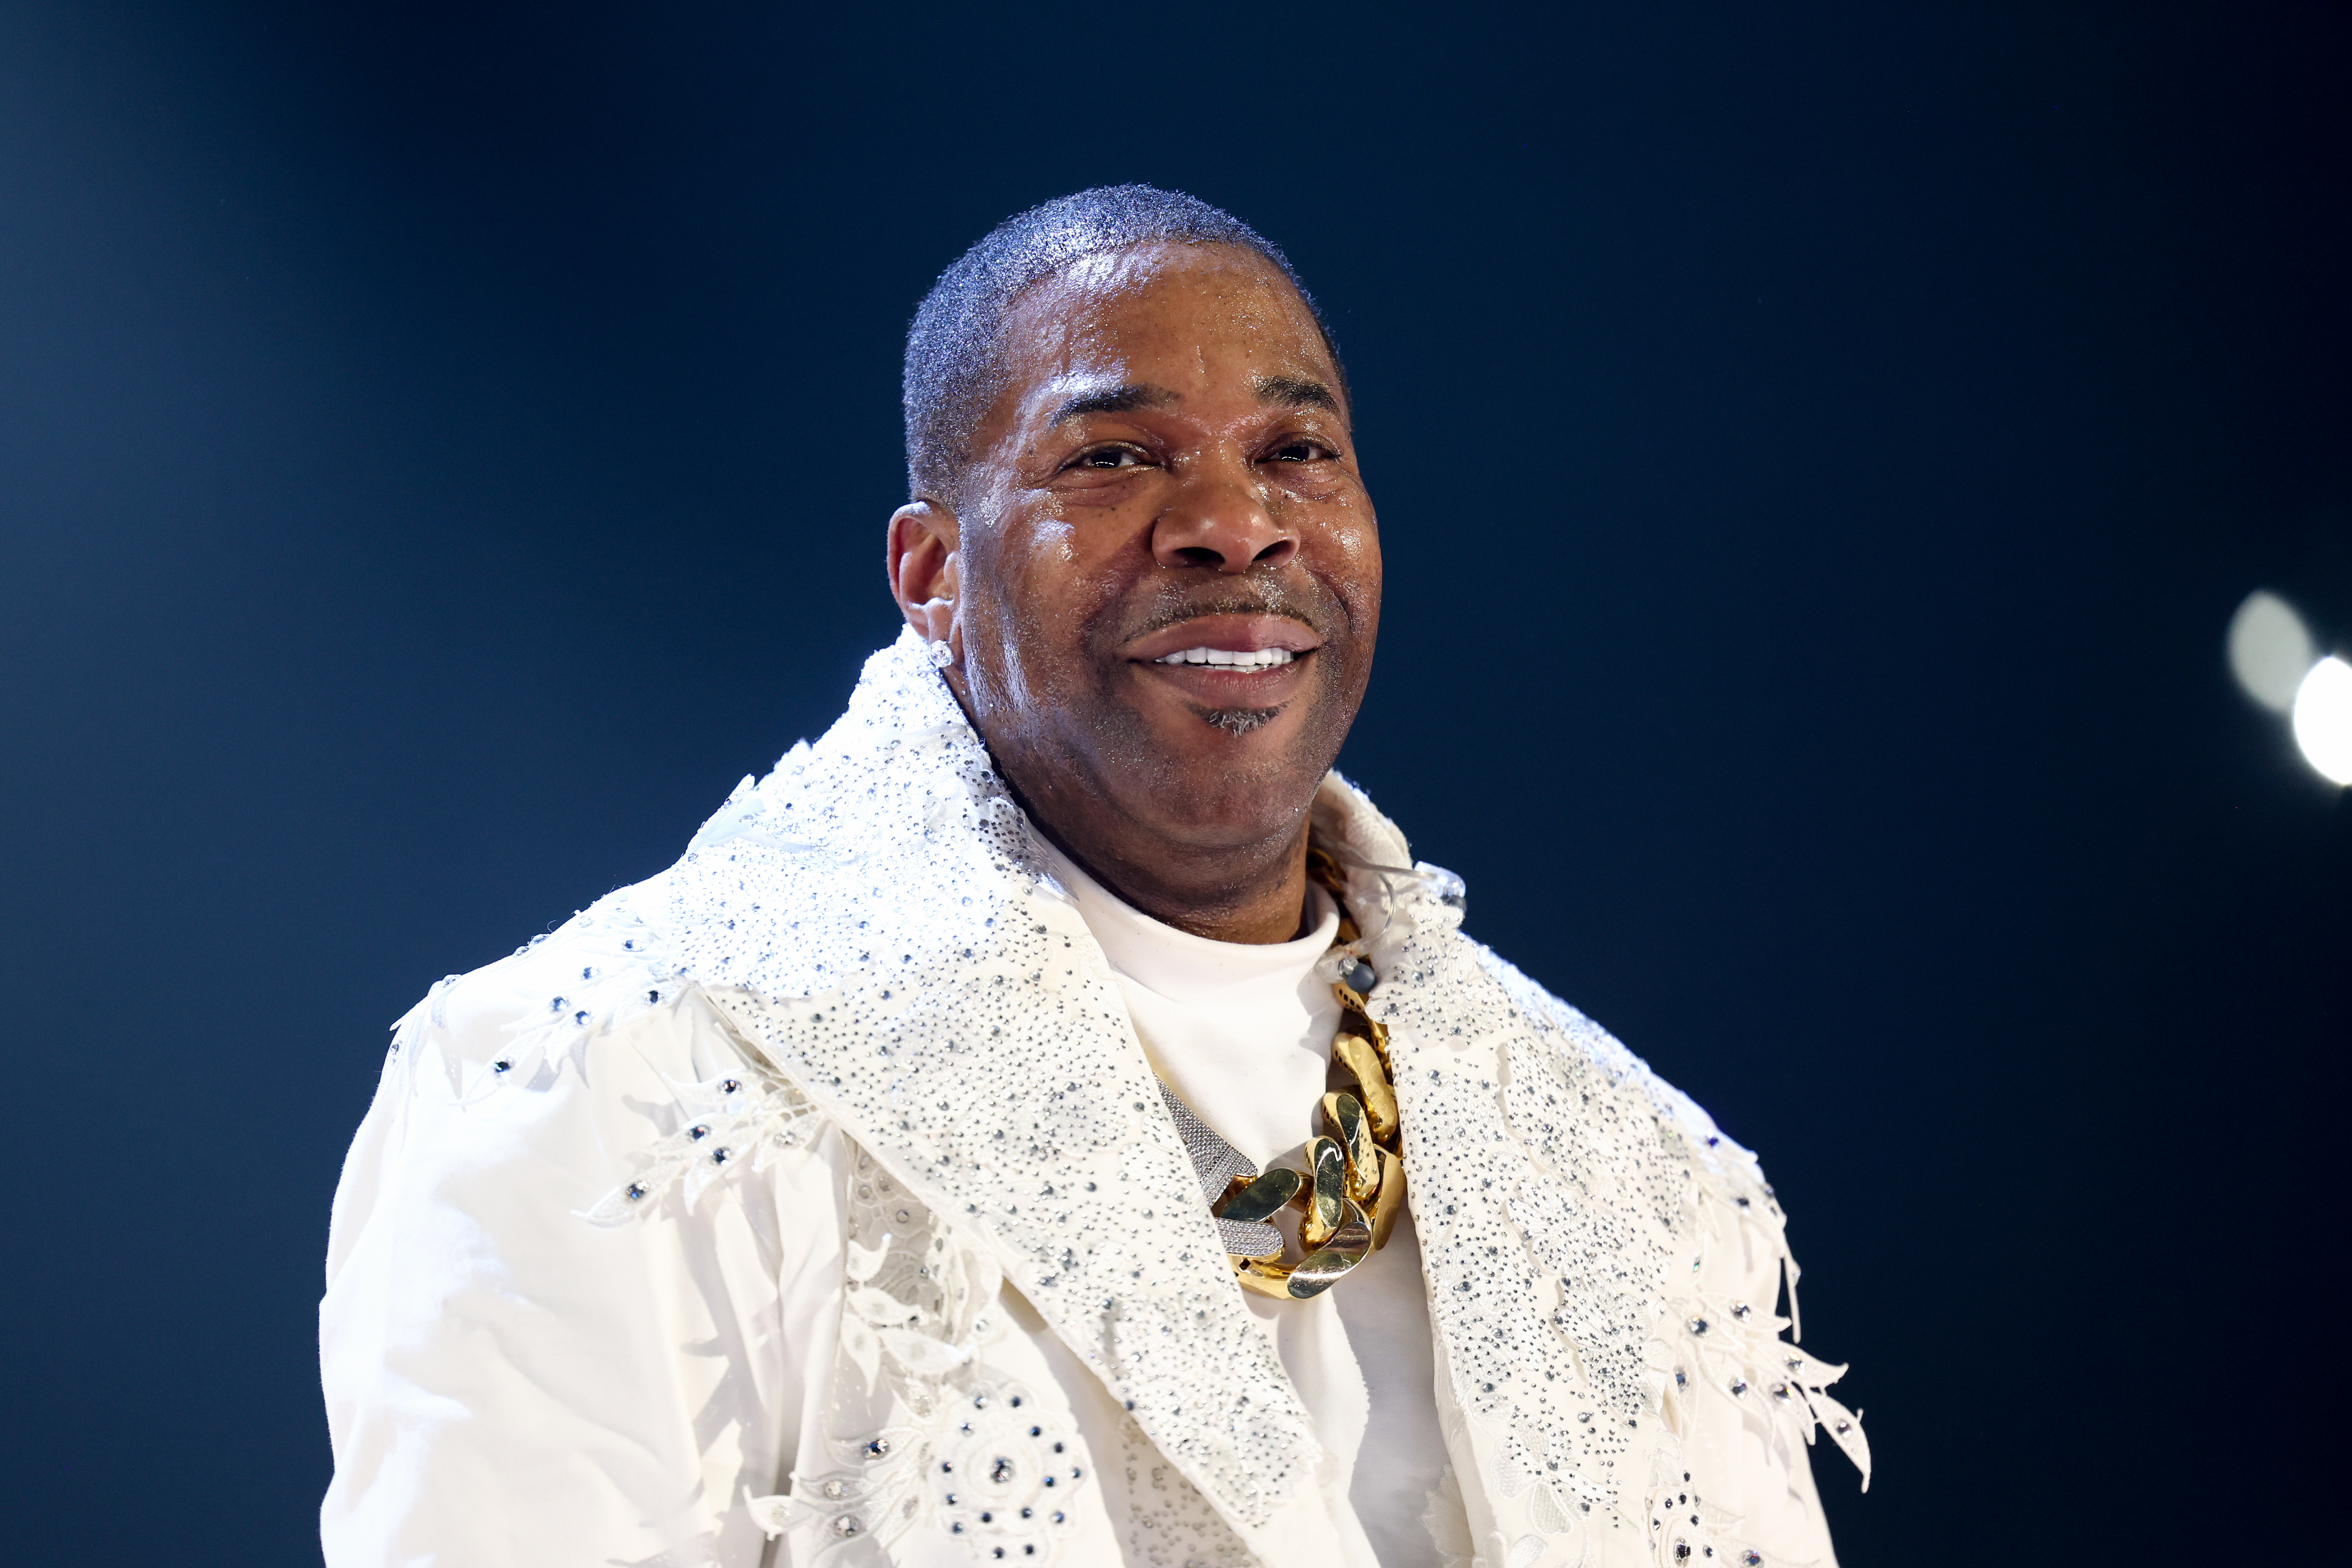 Busta Rhymes at the BET Awards 2023 held at Microsoft Theater on June 25, 2023, in Los Angeles, California. | Source: Getty Images